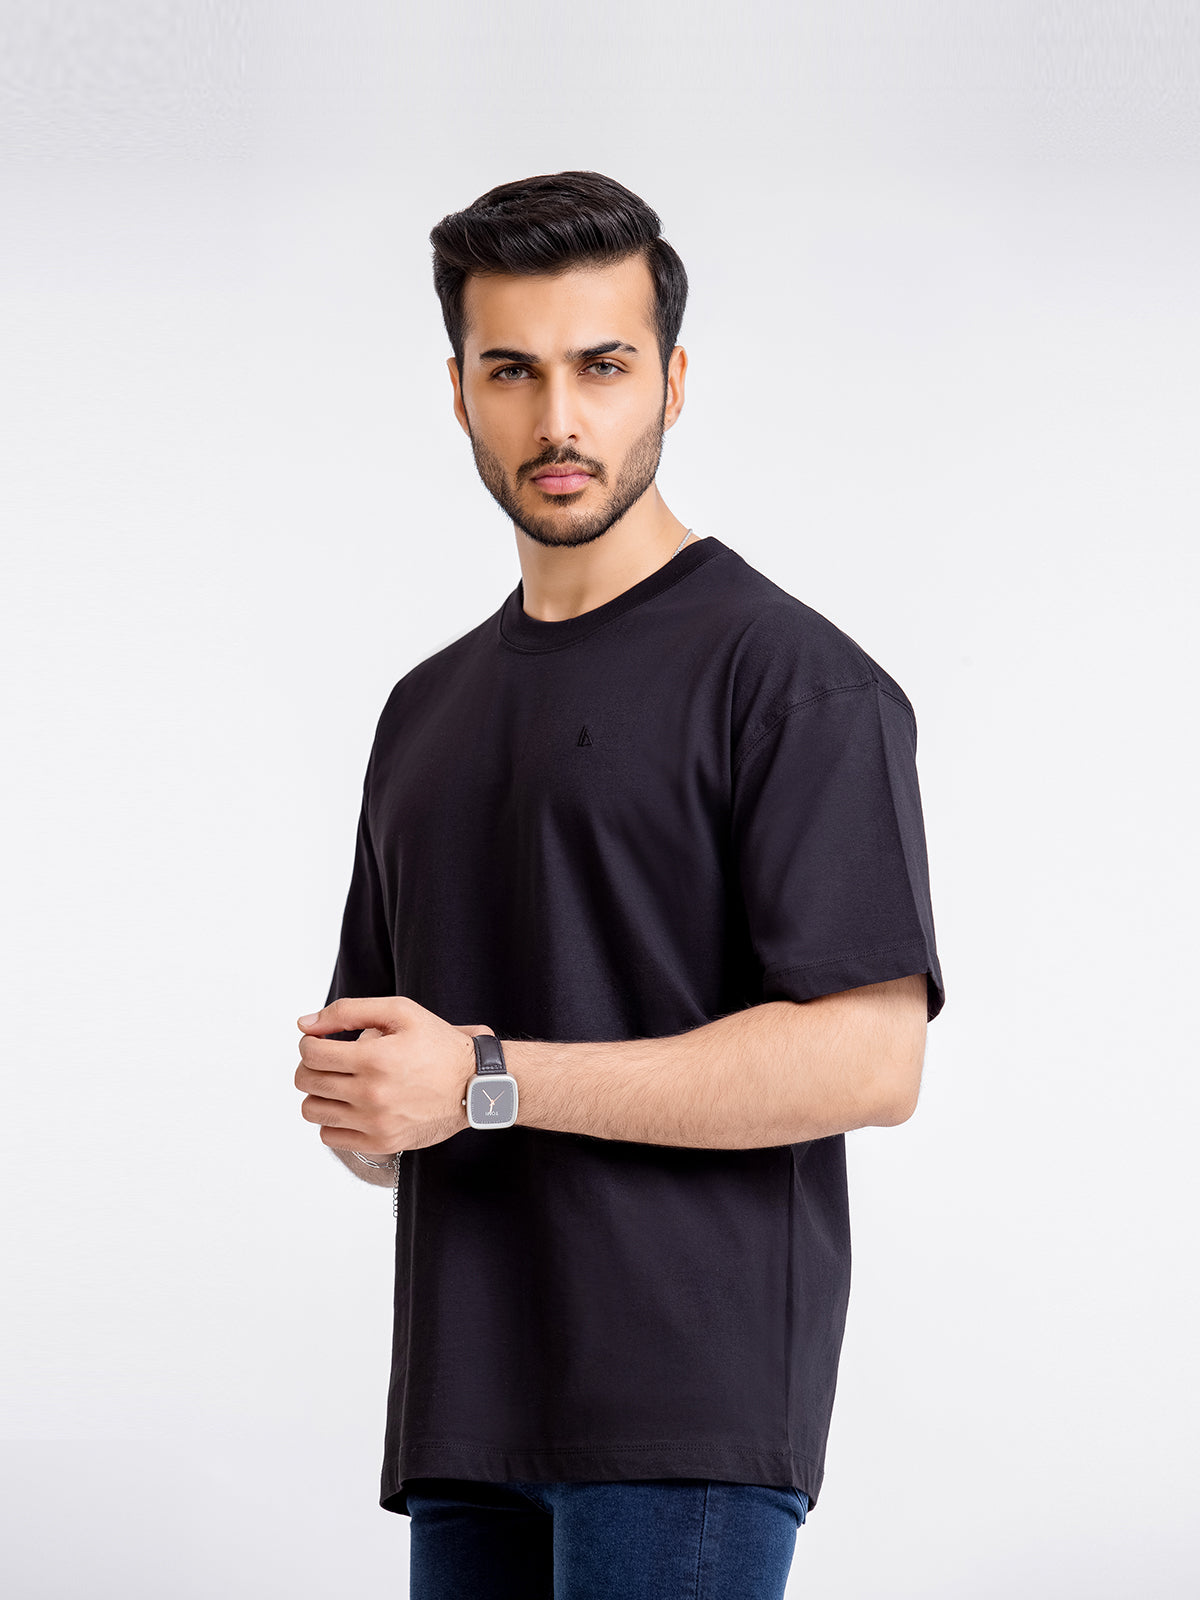 Basic Relax Fit Tee - FMTBL23-001